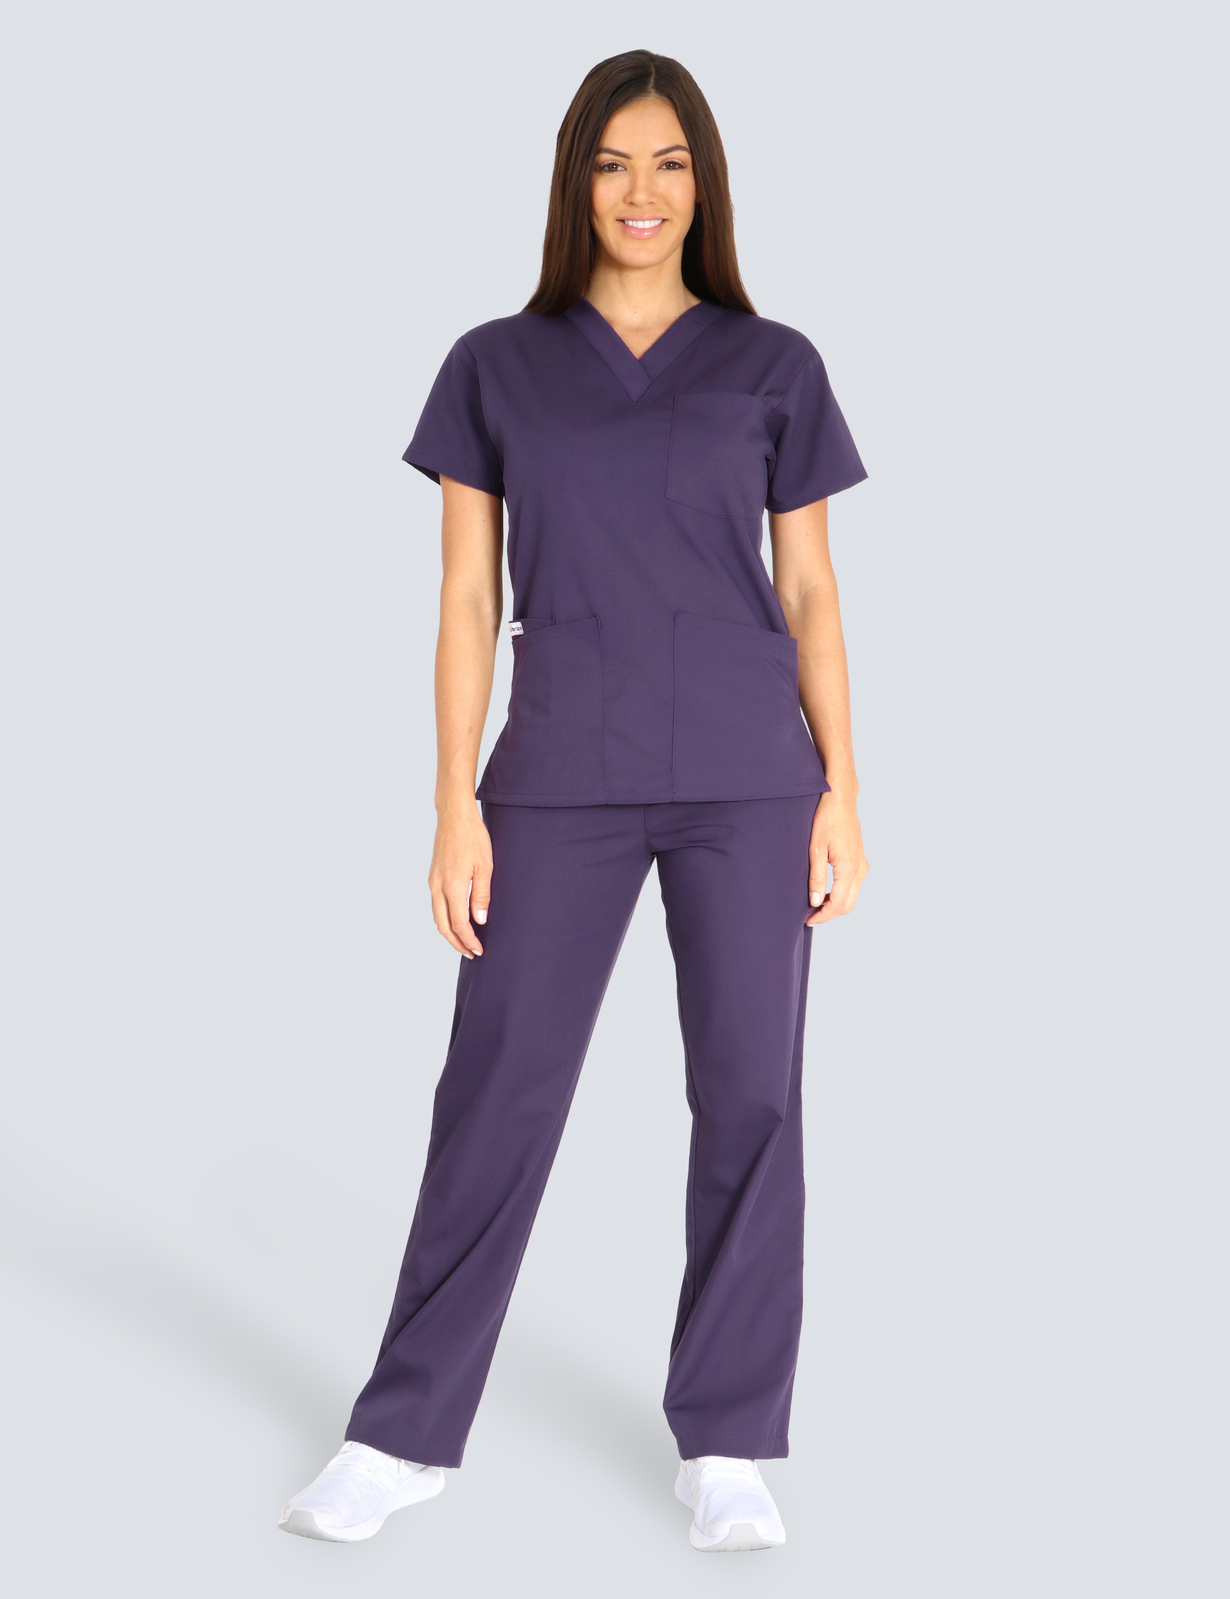 Ipswich Hospital Midwifery (4 Pocket Top and Cargo Pants in Aubergine incl Logos)